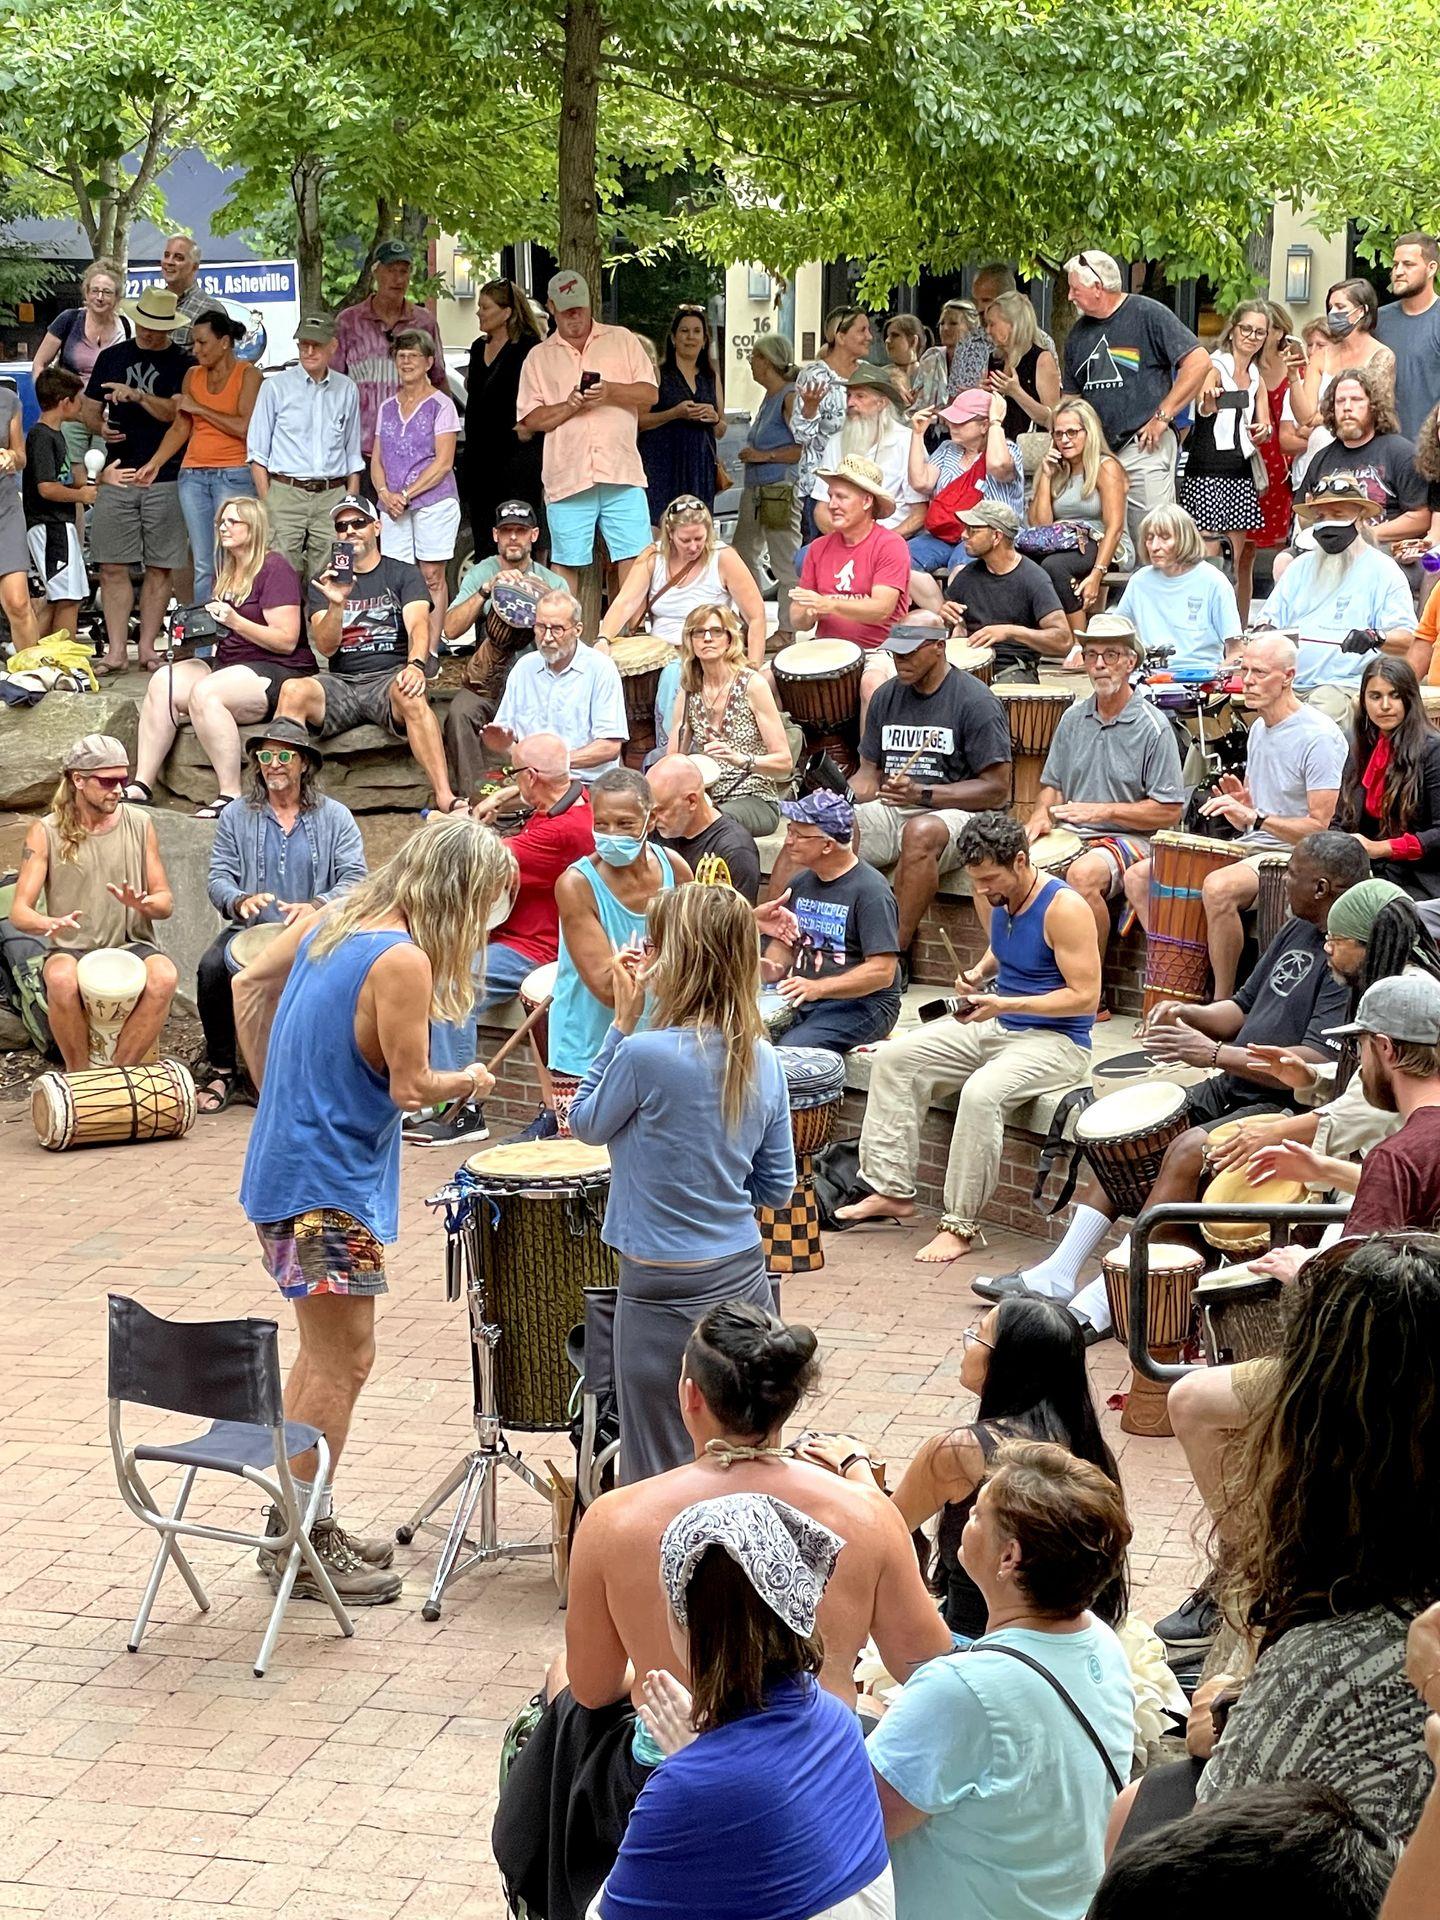 Several people playing drums together in Pritchard Park.